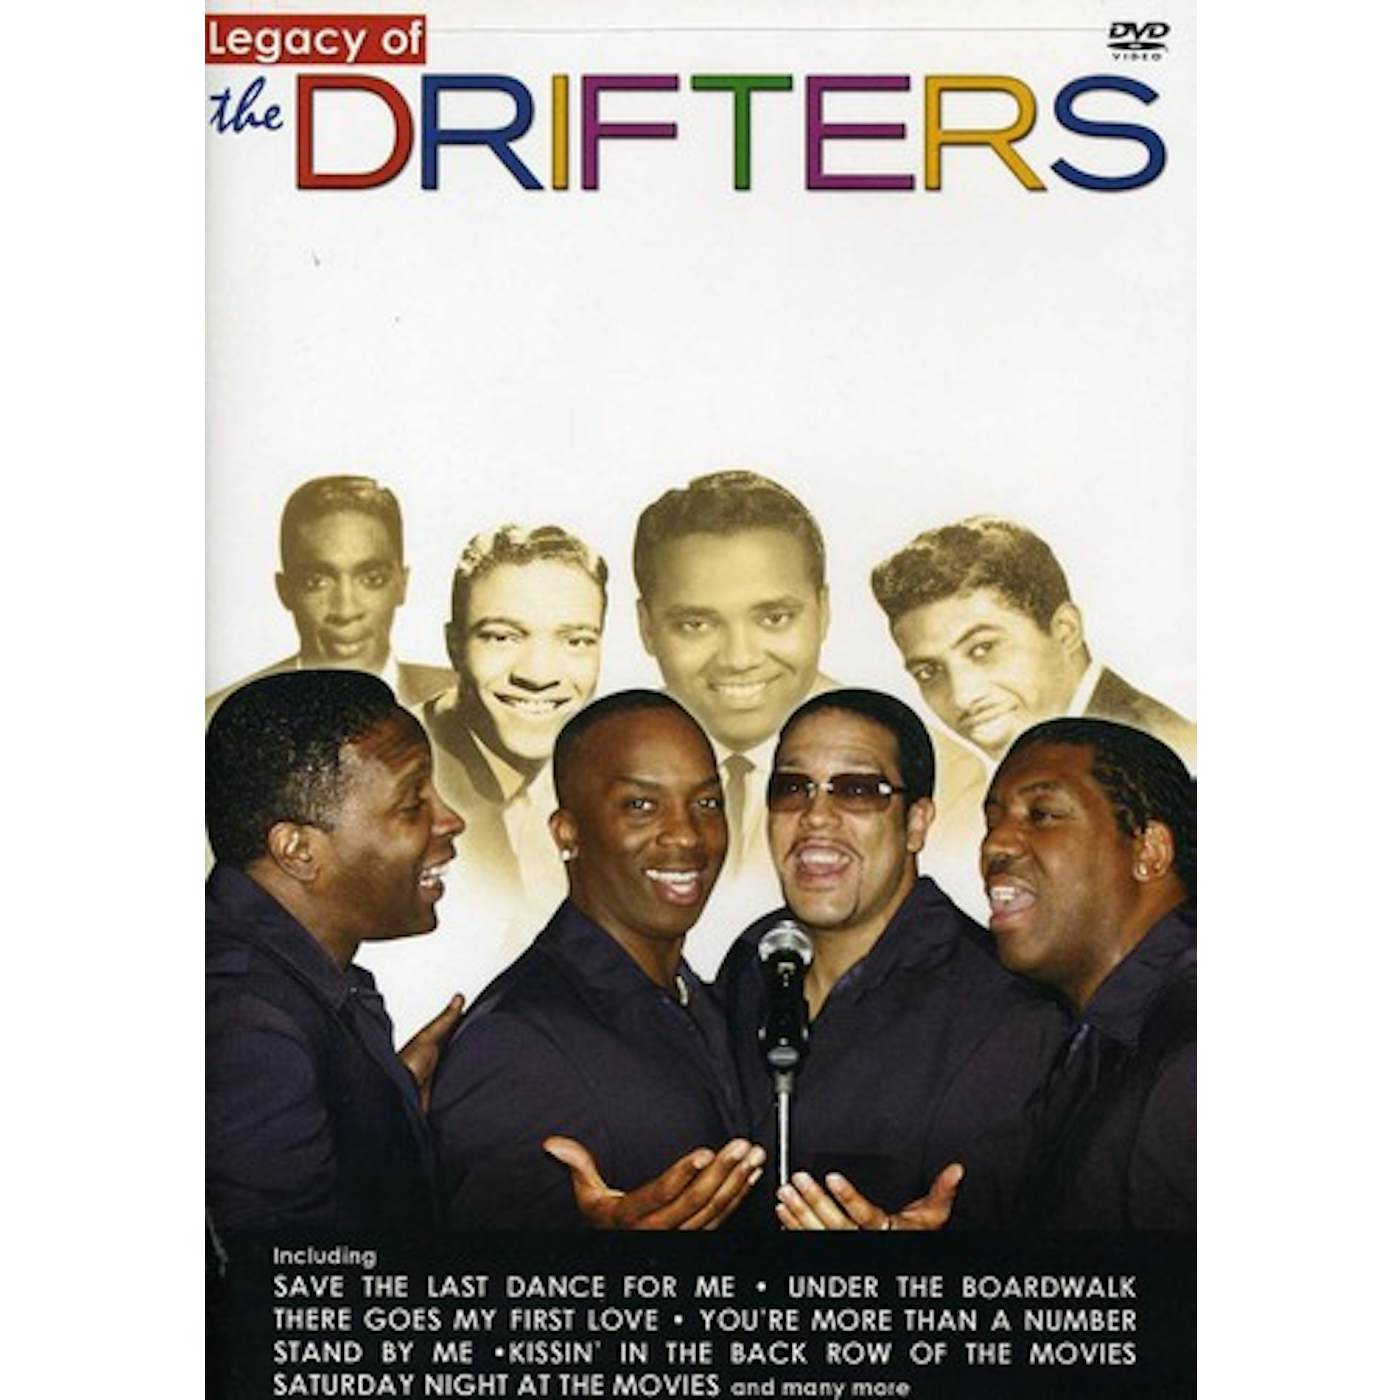 LEGACY OF THE DRIFTERS DVD